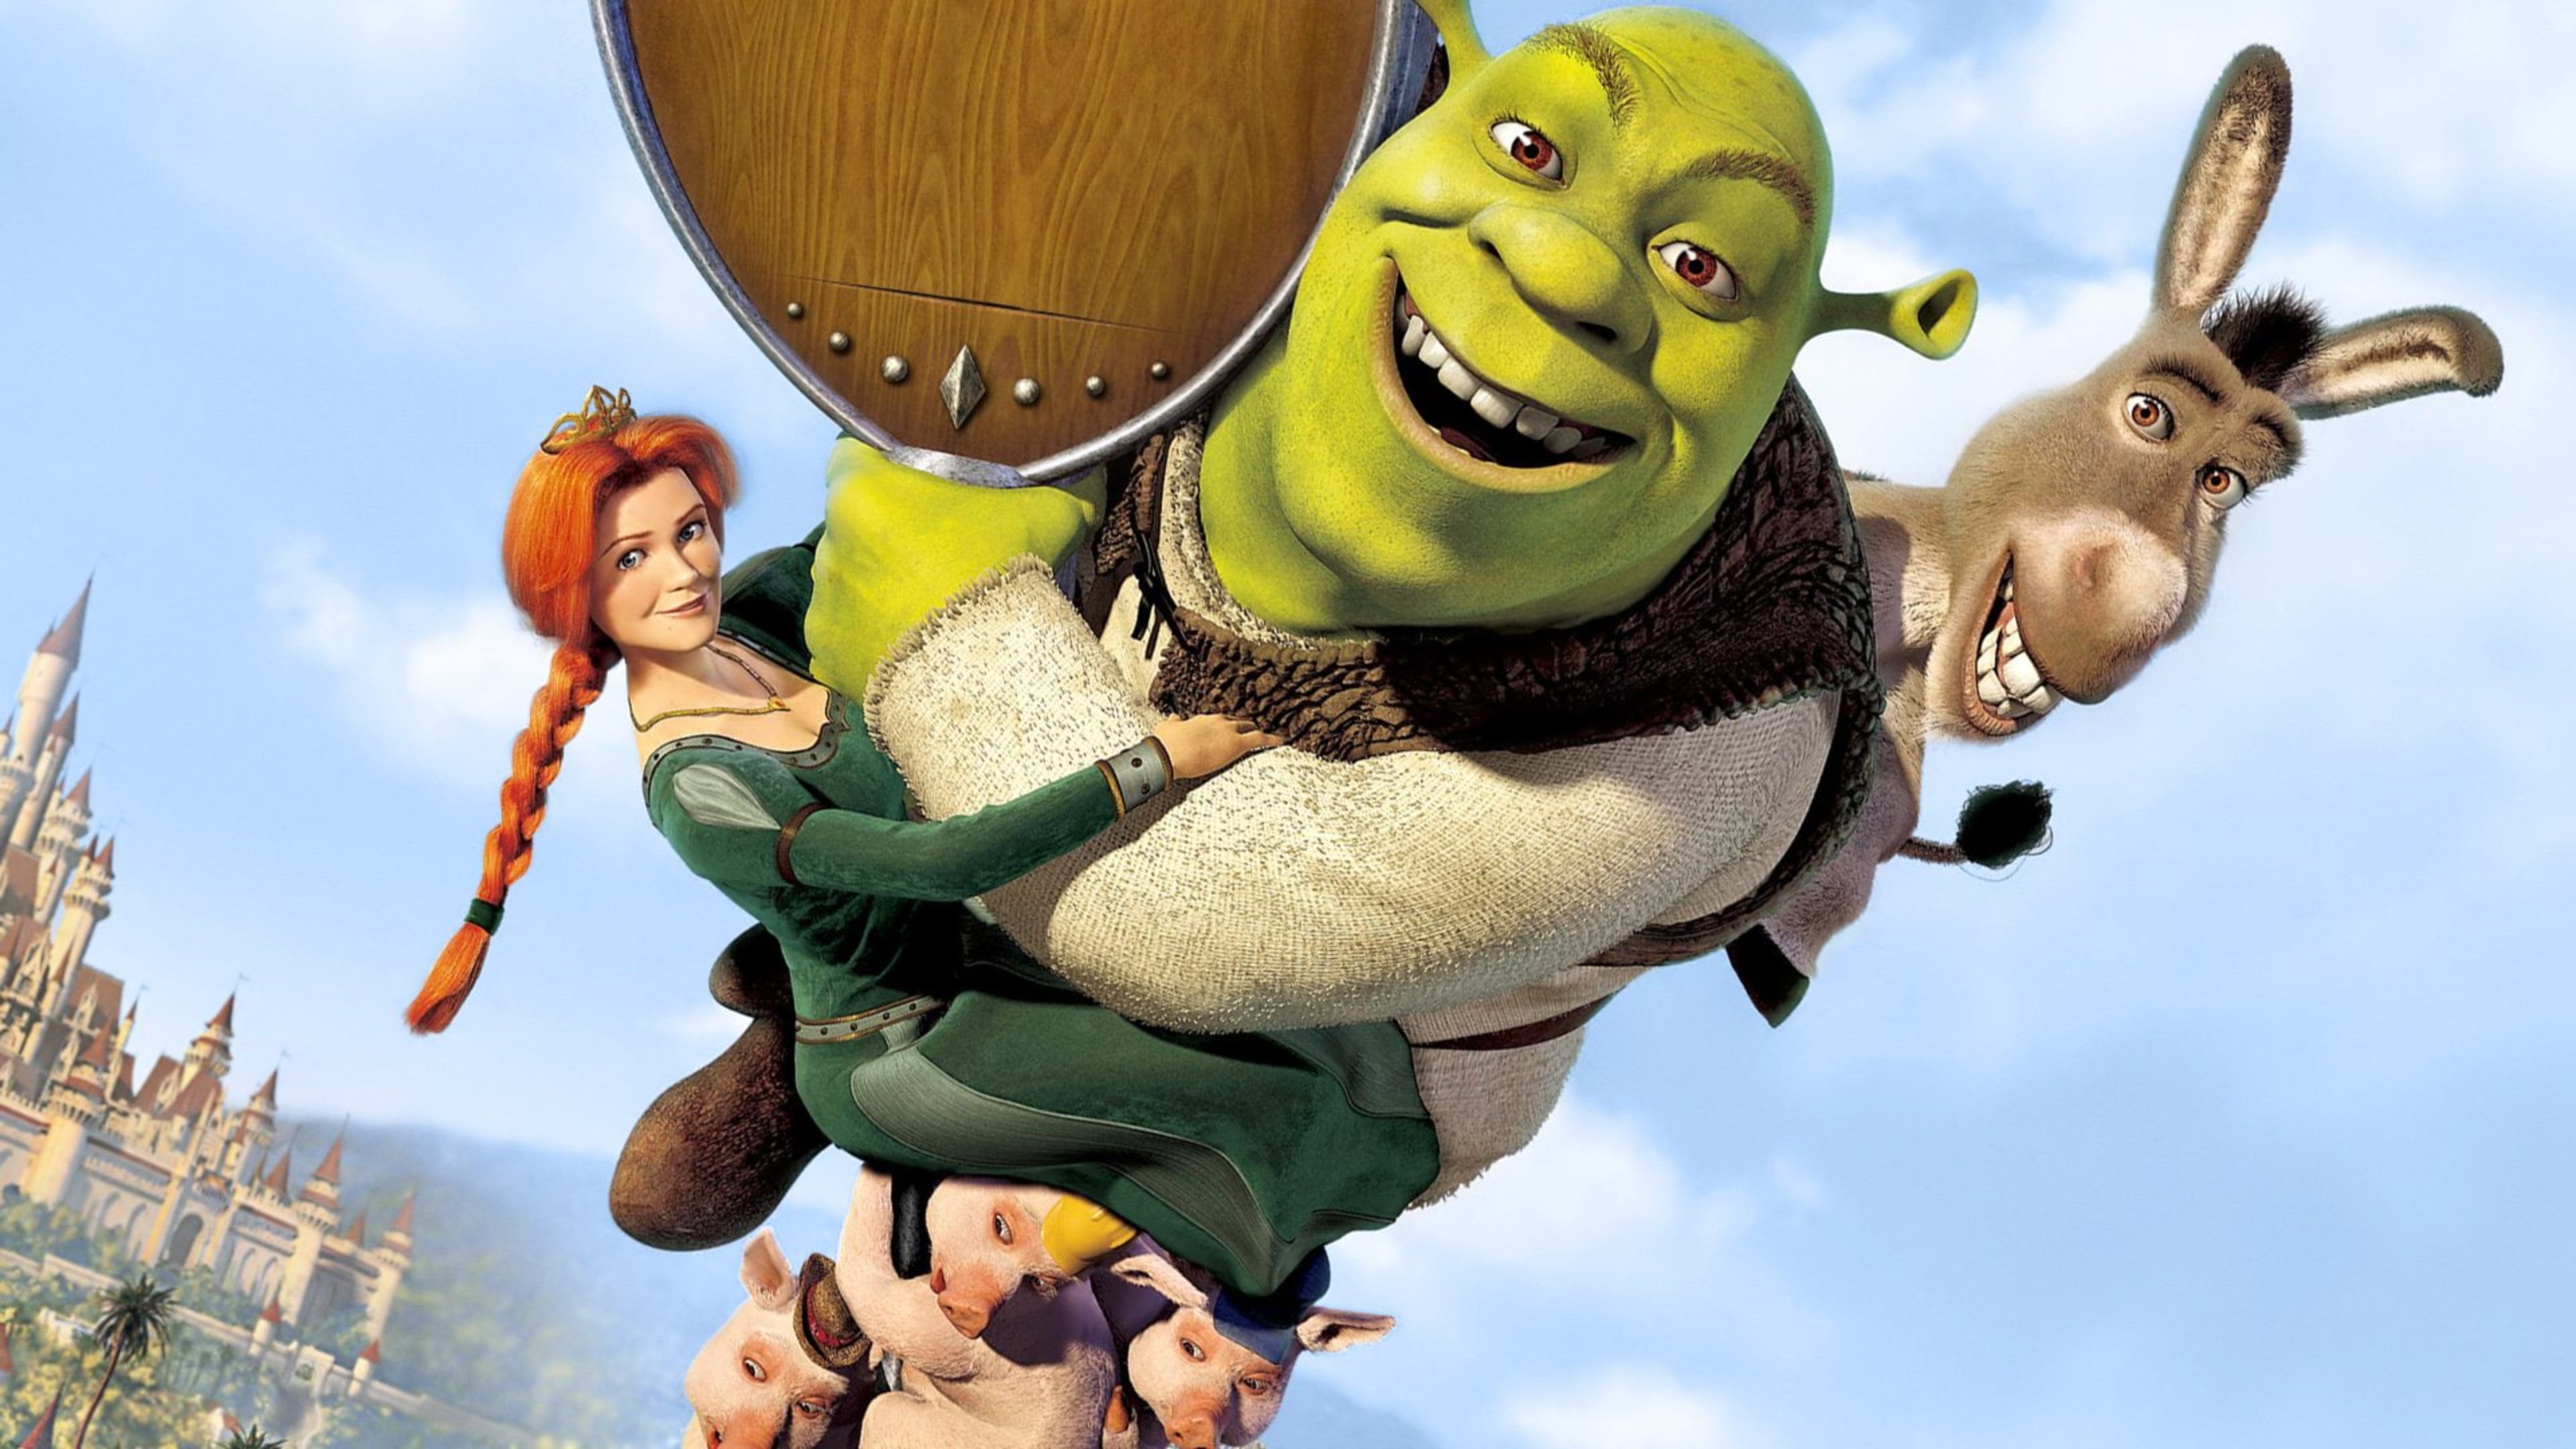 A red-haired princess rides on the back of a green ogre while a donkey looks on. - Shrek